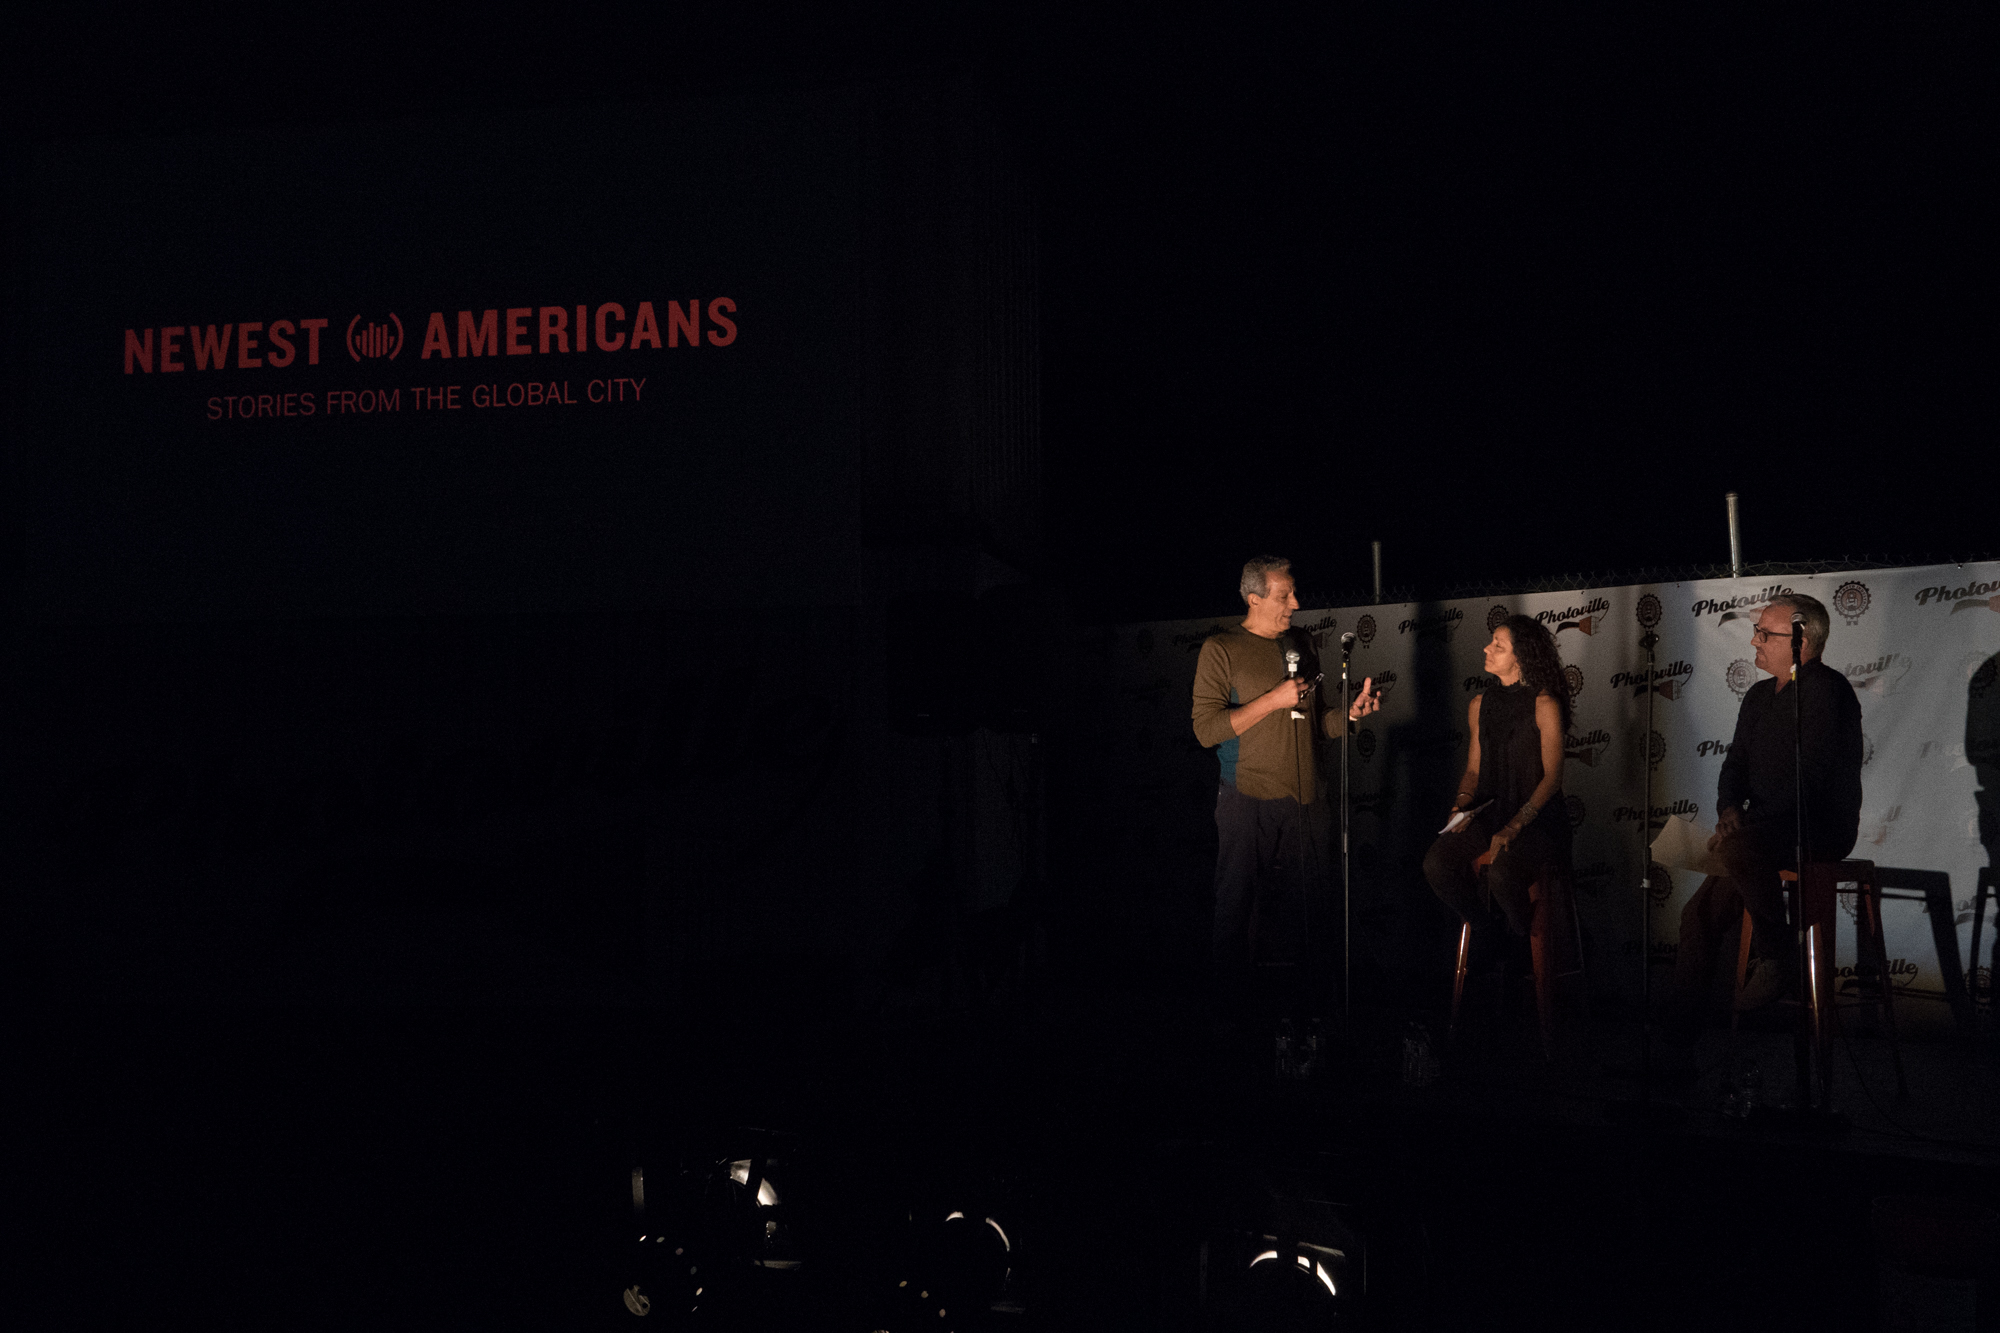  Newest Americans partners Ed Kashi, Julie Winokur, and Tim Raphael introduce the project in the Beer Garden at Photoville's Opening Night. (Photo by Stephanie Khoury) 